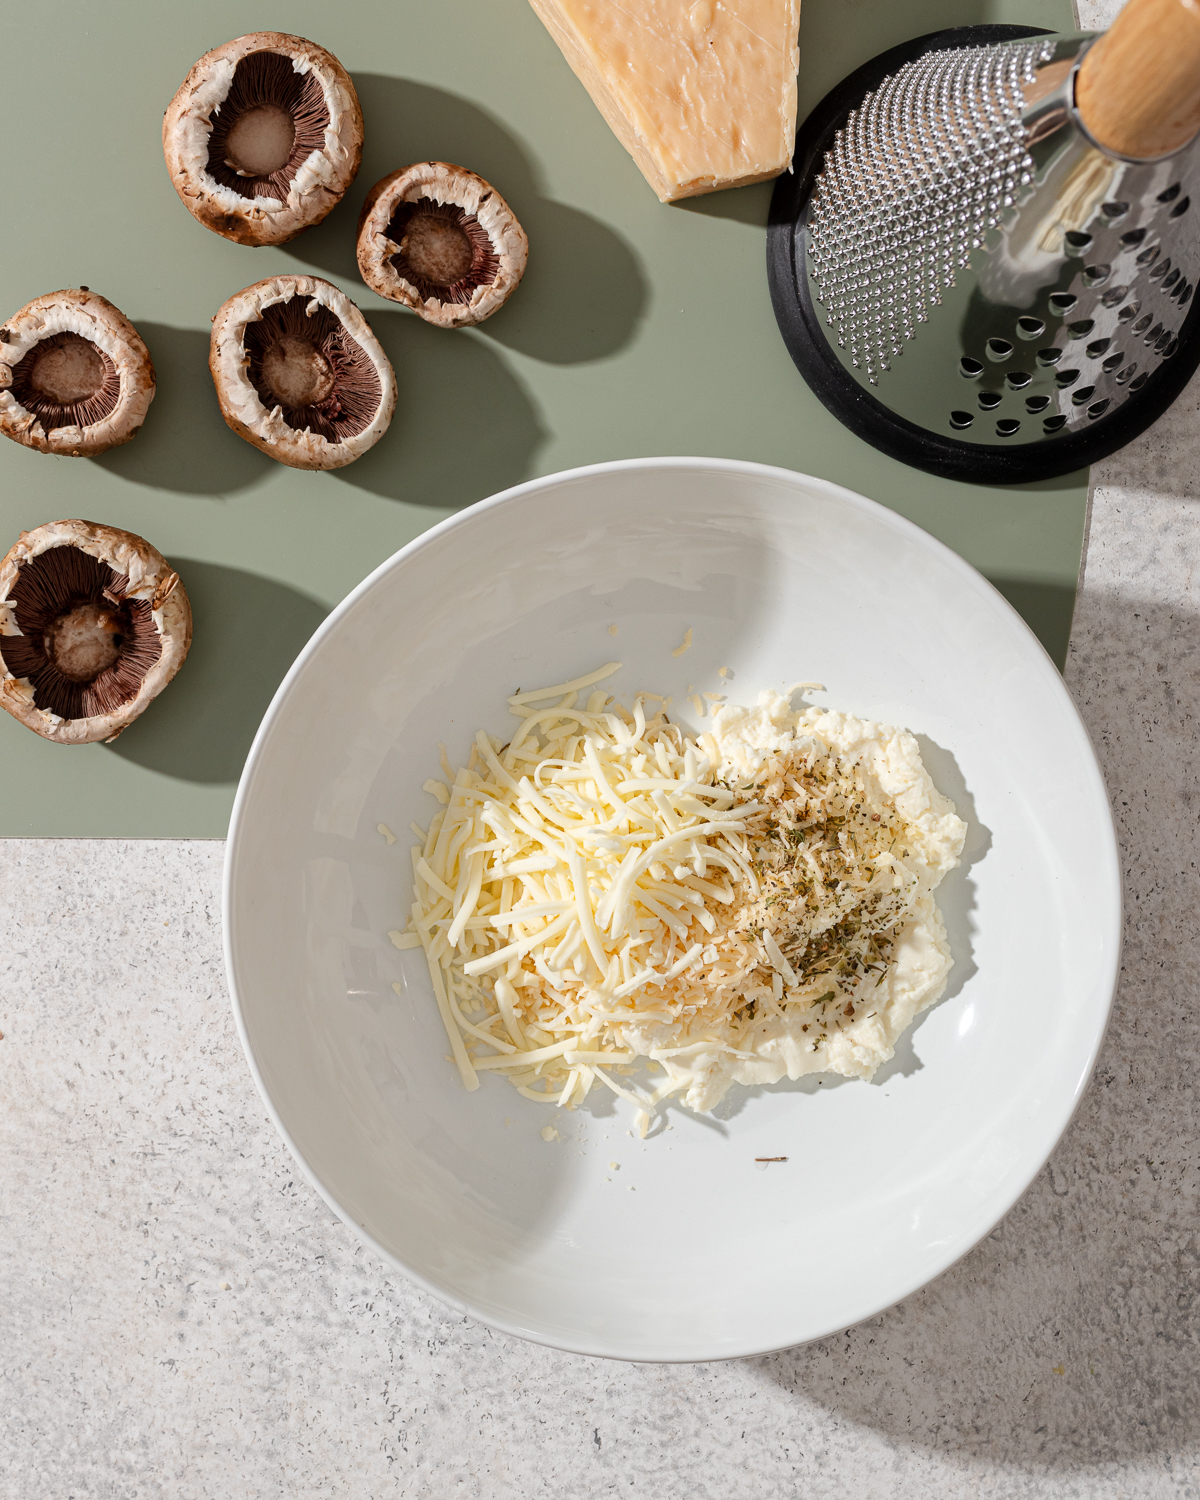 Ingredients for stuffed mushrooms with ricotta in a white bowl.